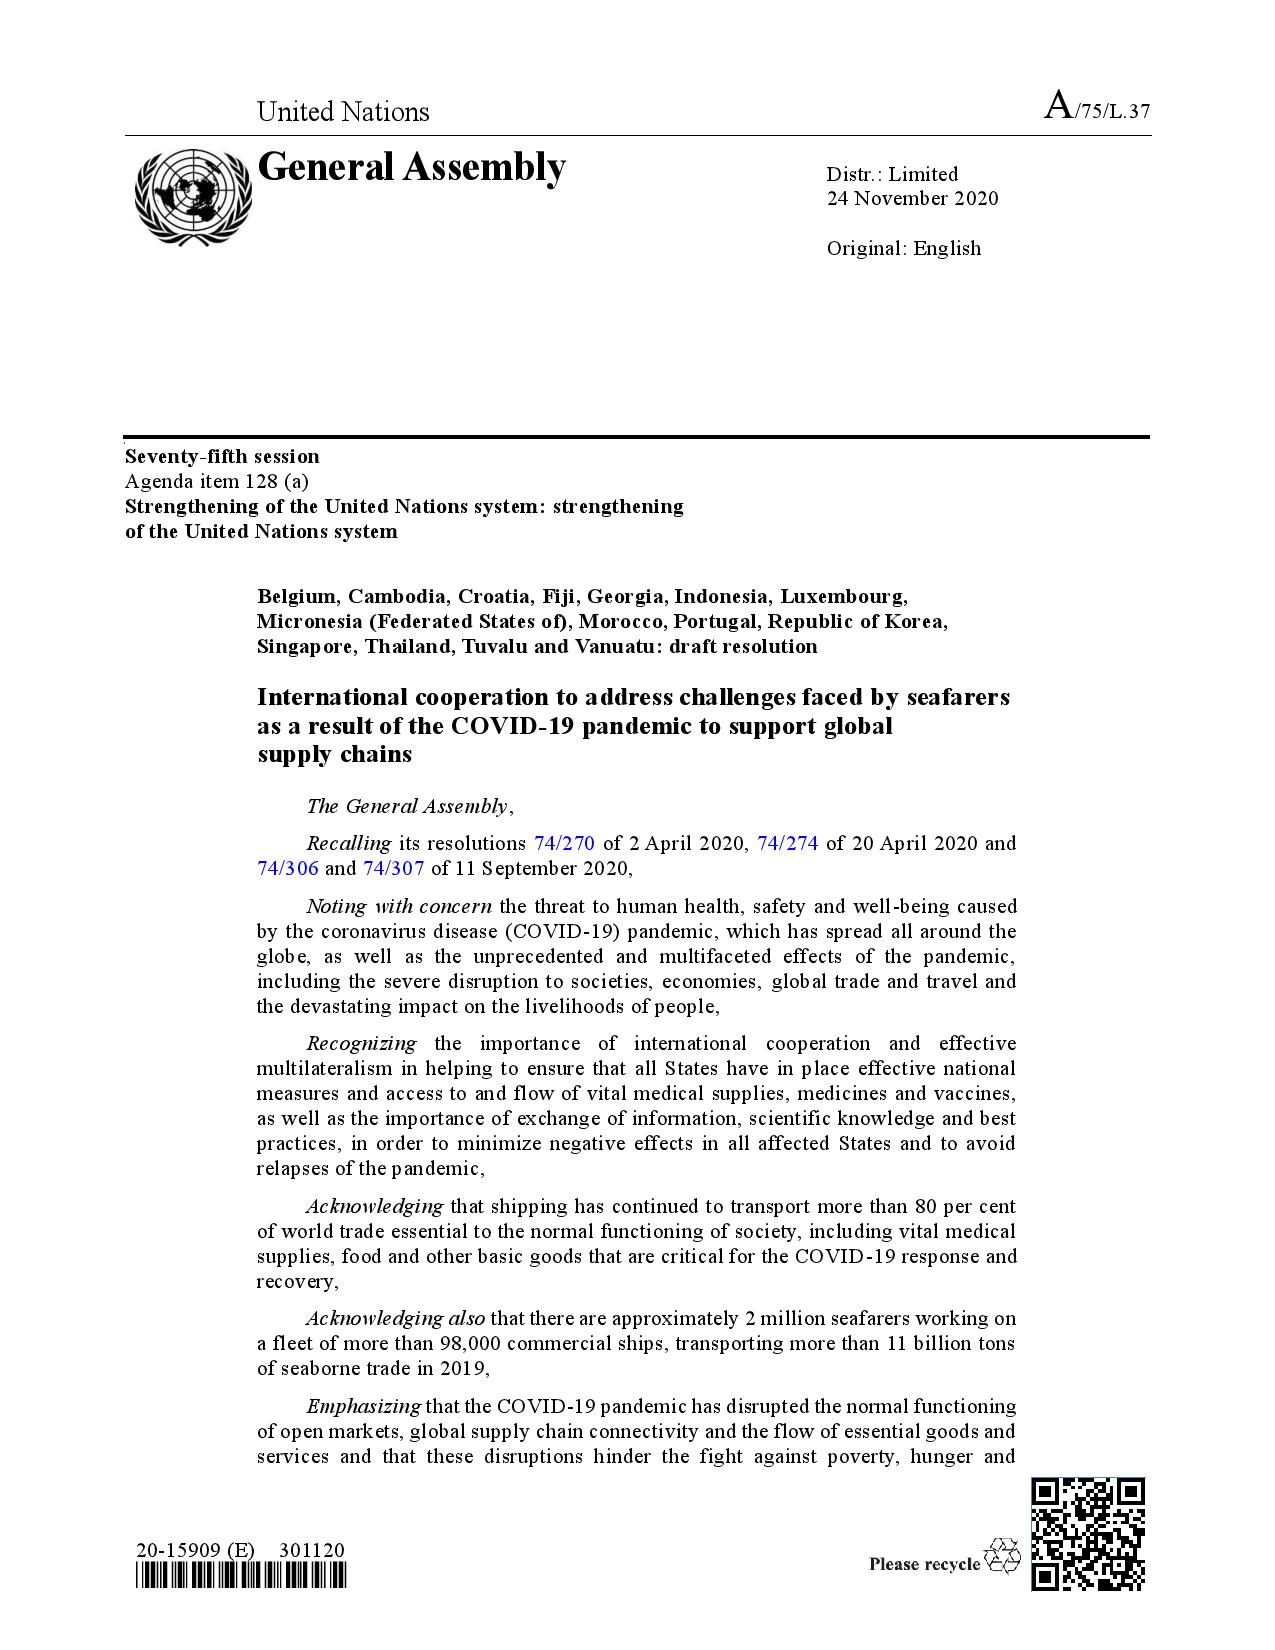 UN RESOLUTION ON SEAFARERS page 001